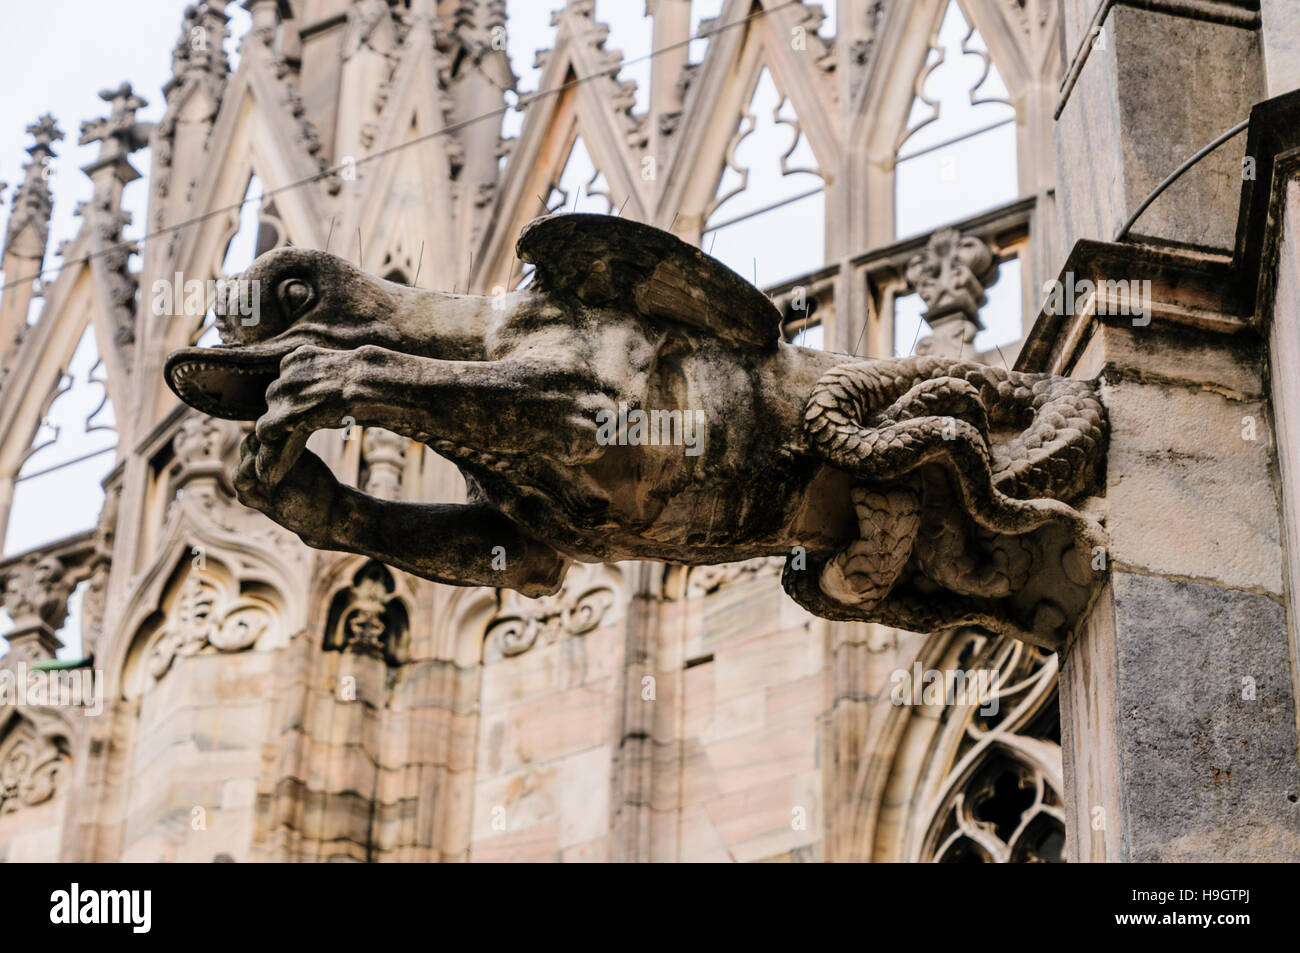 Gargoyles and other ornate carved stonework outside the Duomo Milano (Milan Cathedral) Stock Photo